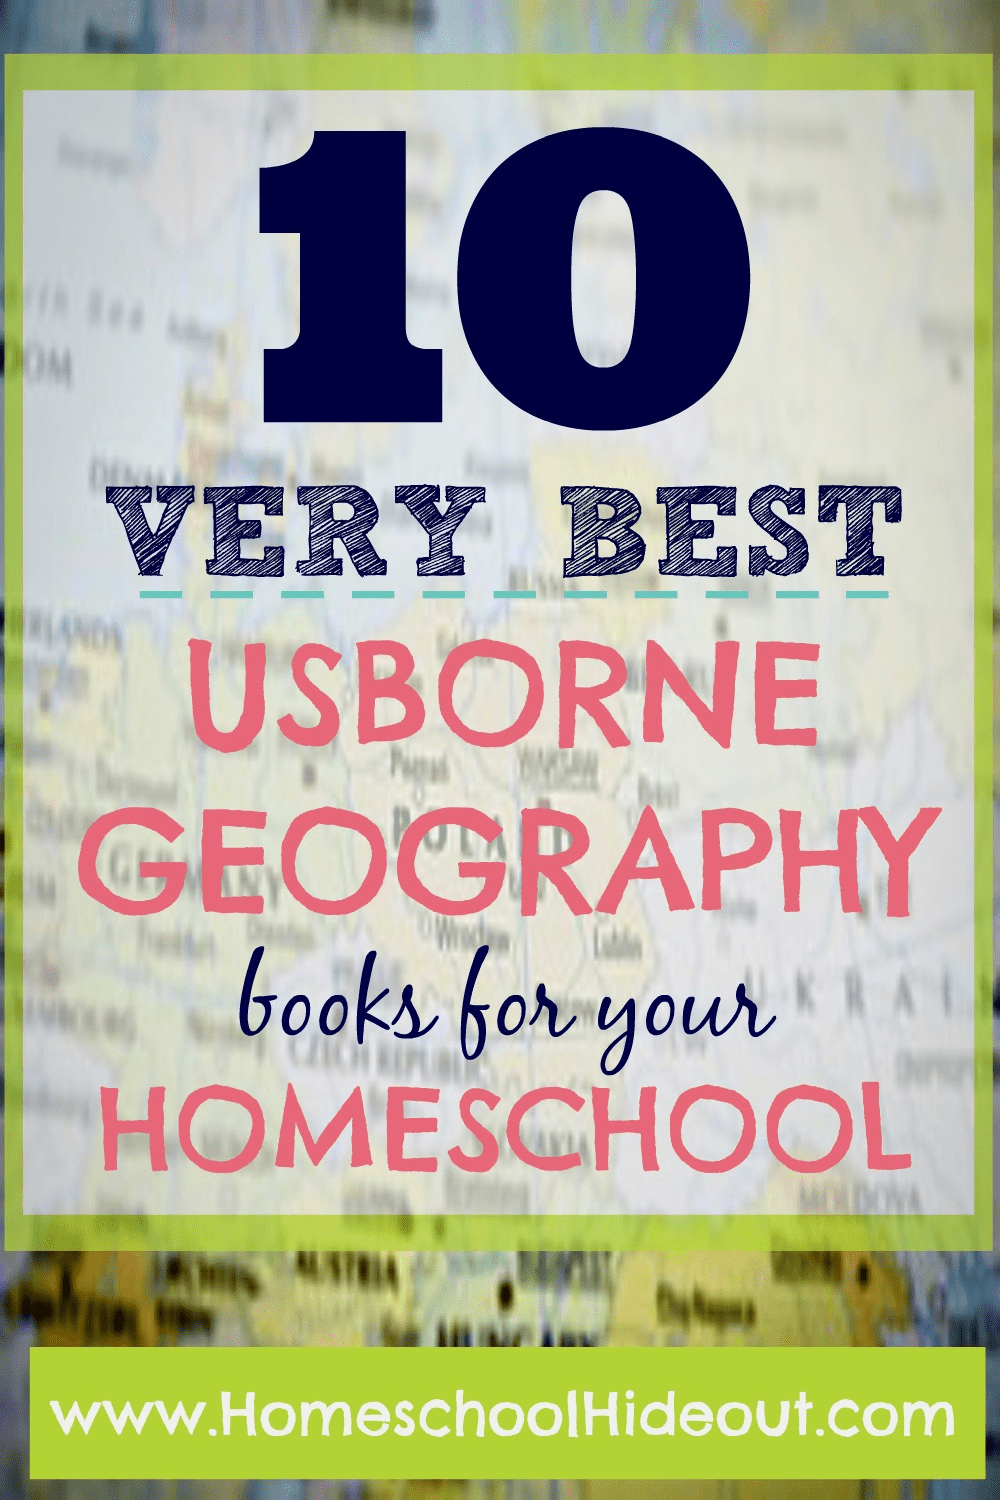 With vibrant photos and tons of fun facts, these 10 Usborne geography books are perfect for any homeschooler!